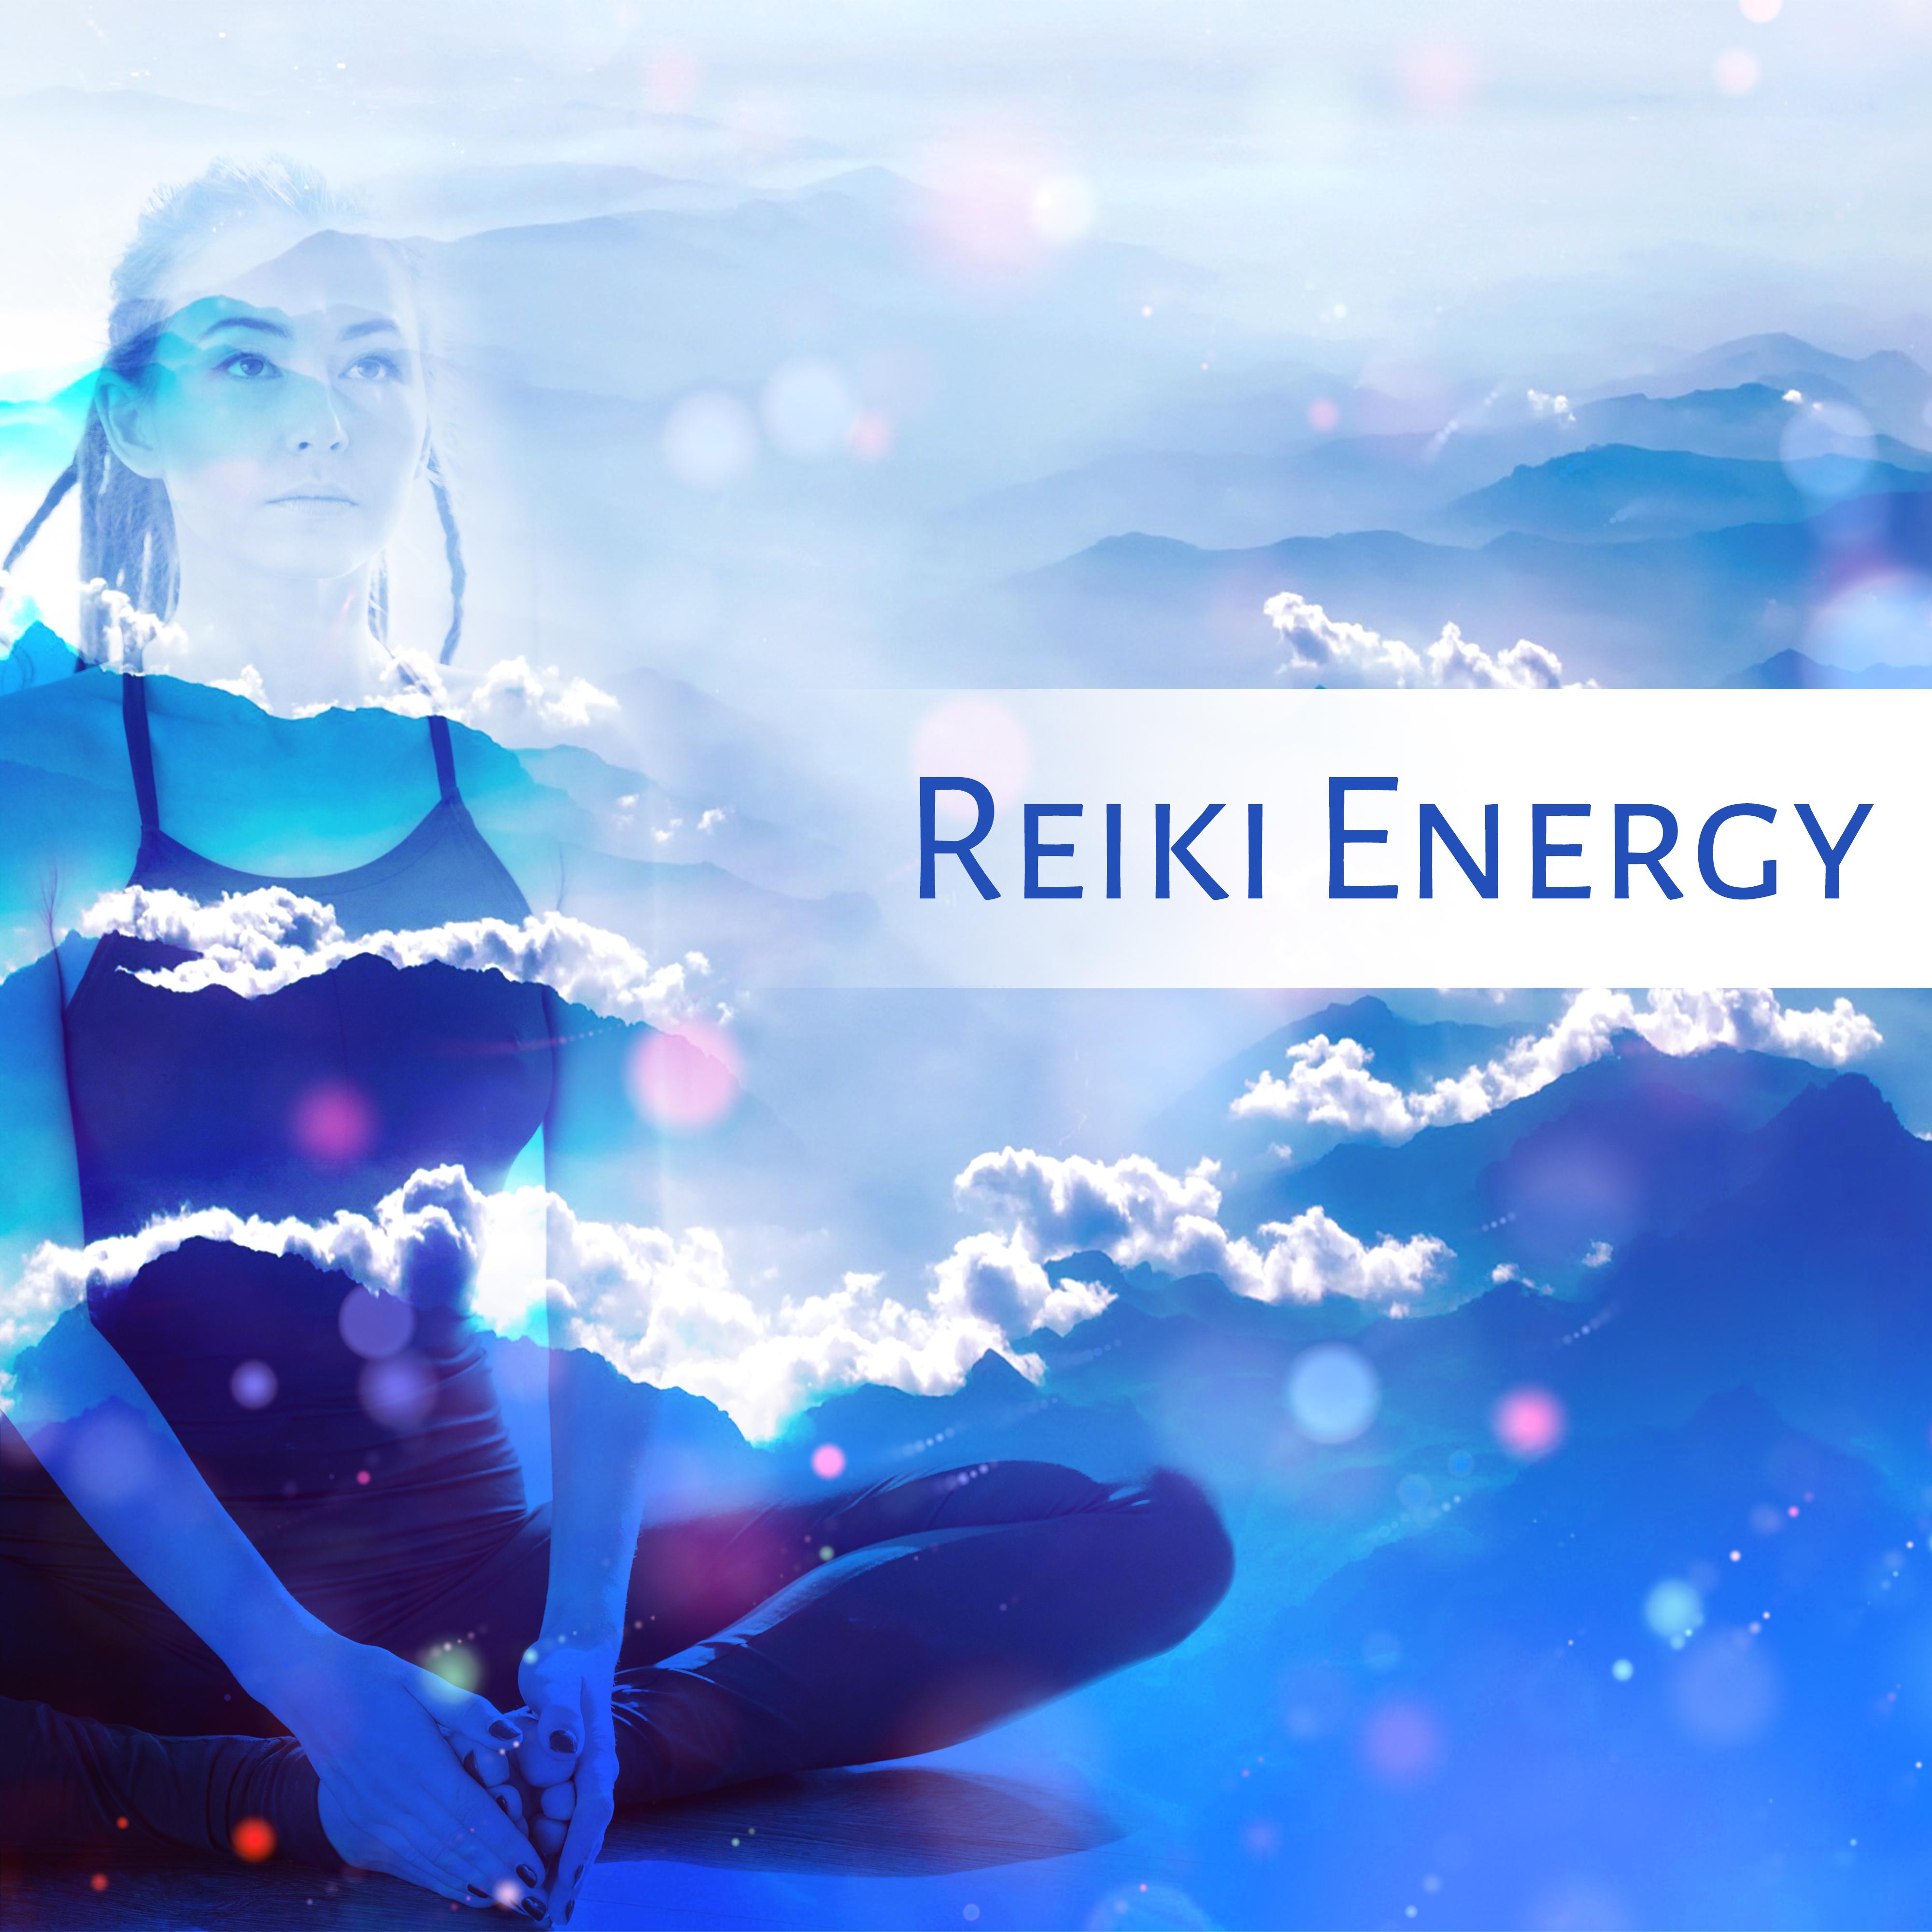 Reiki Energy – Healing Music for Meditation, Pure Mind, Deep Focus, Serenity Yoga, Peaceful Mind, Stress Relief